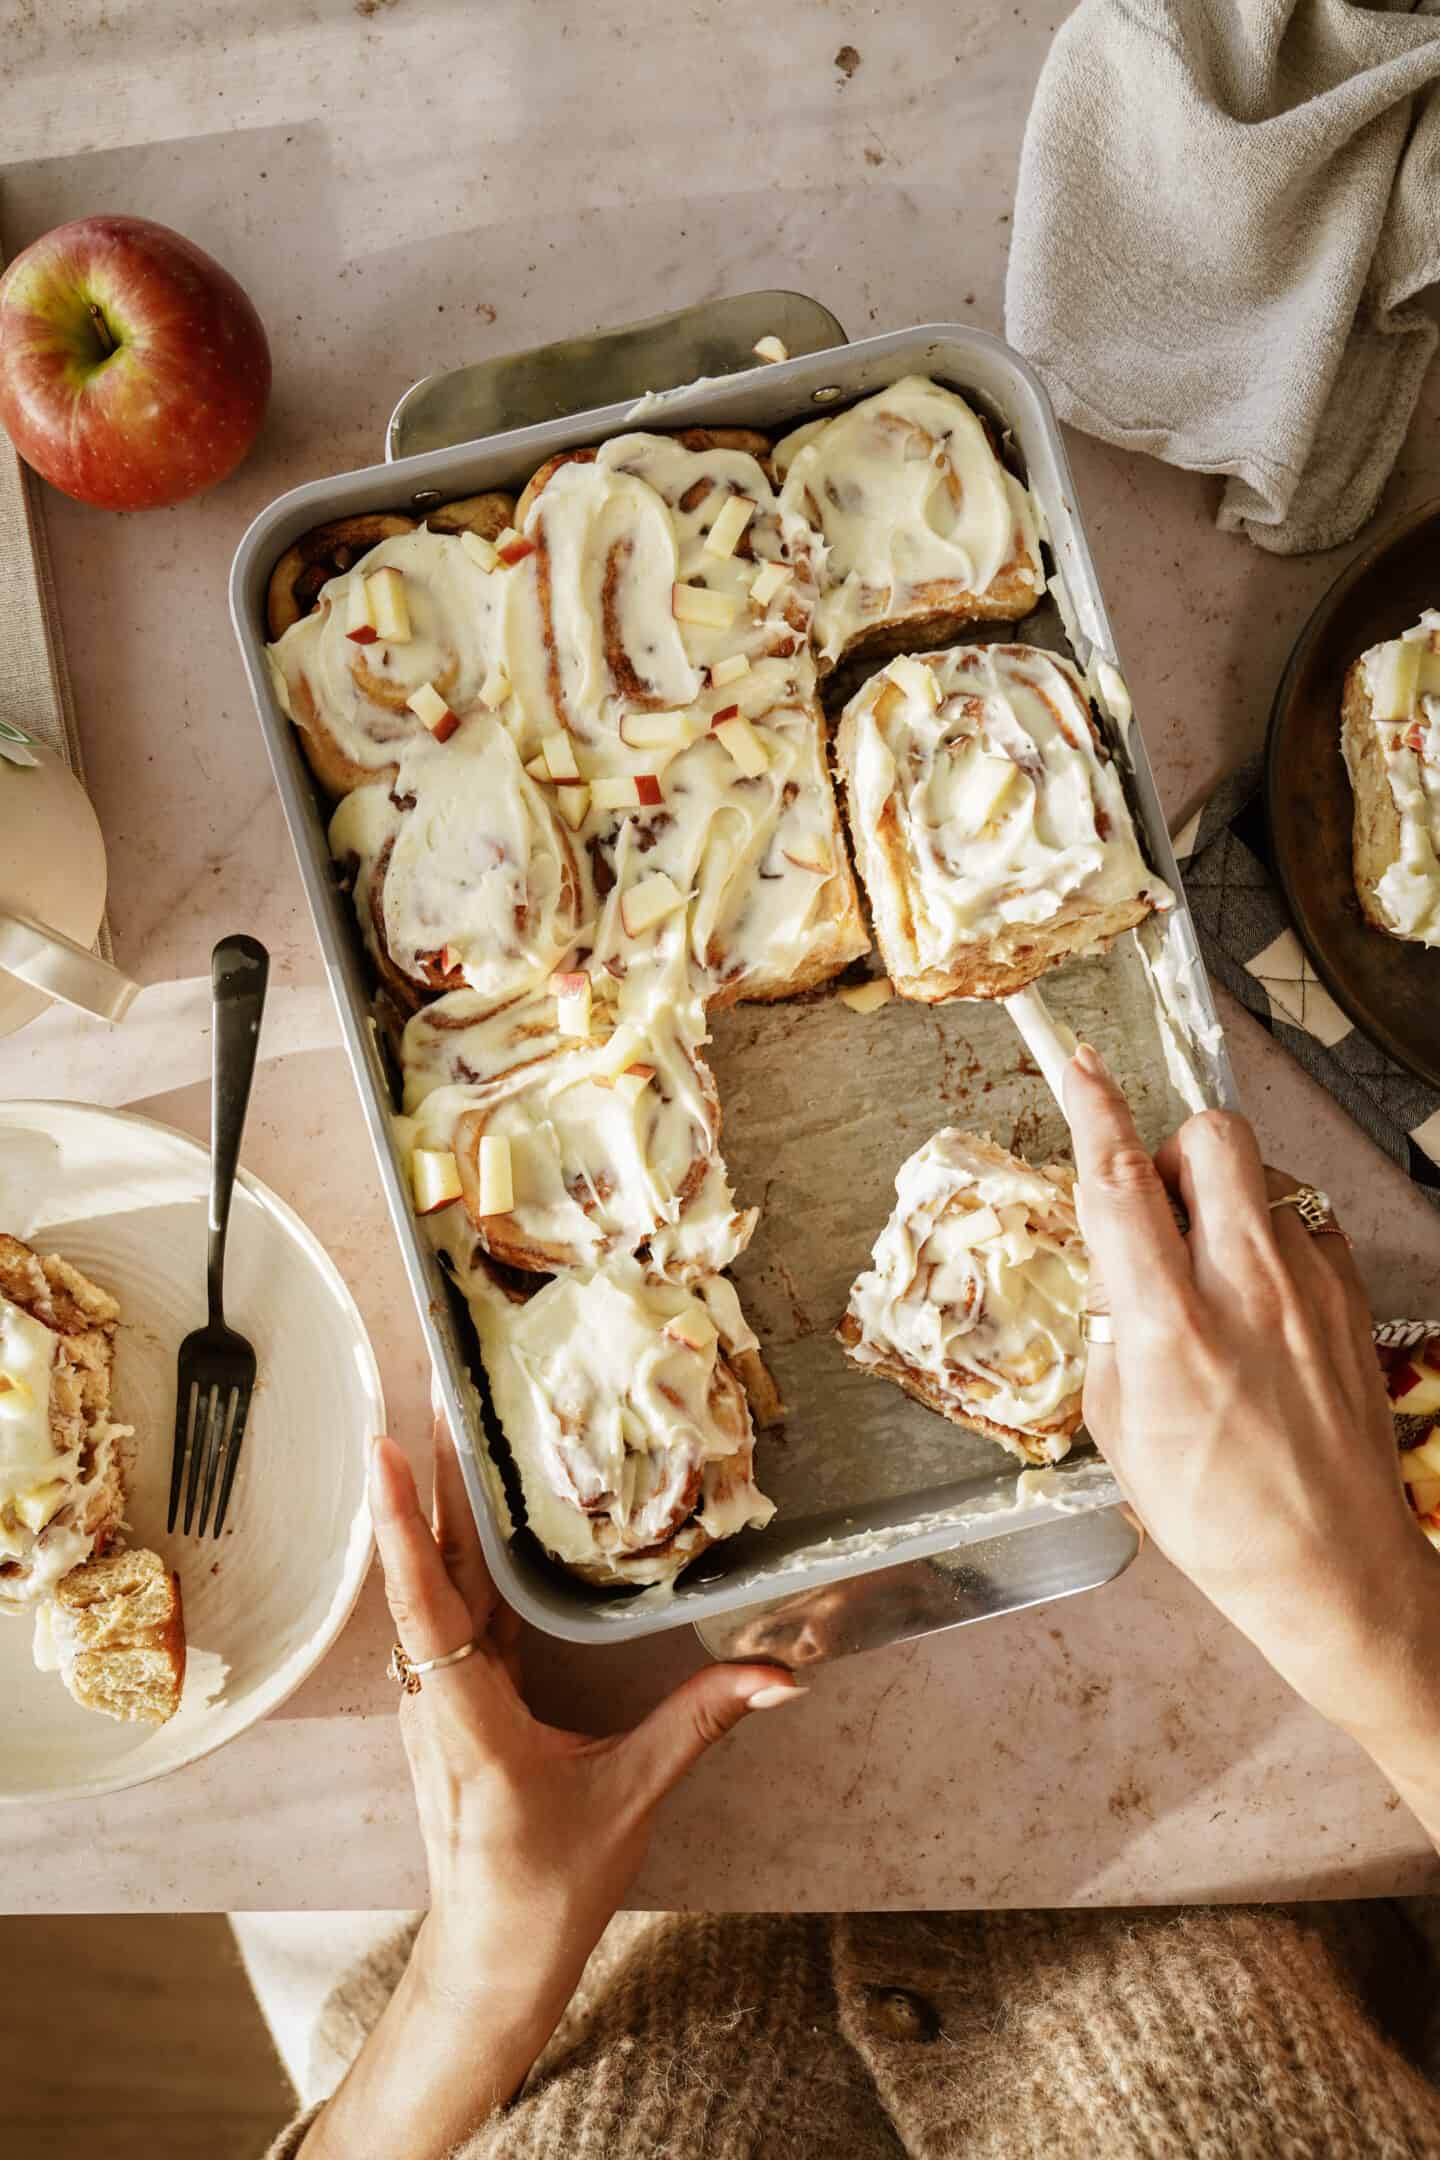 Cinnamon roll recipe in a serving dish with a hand serving